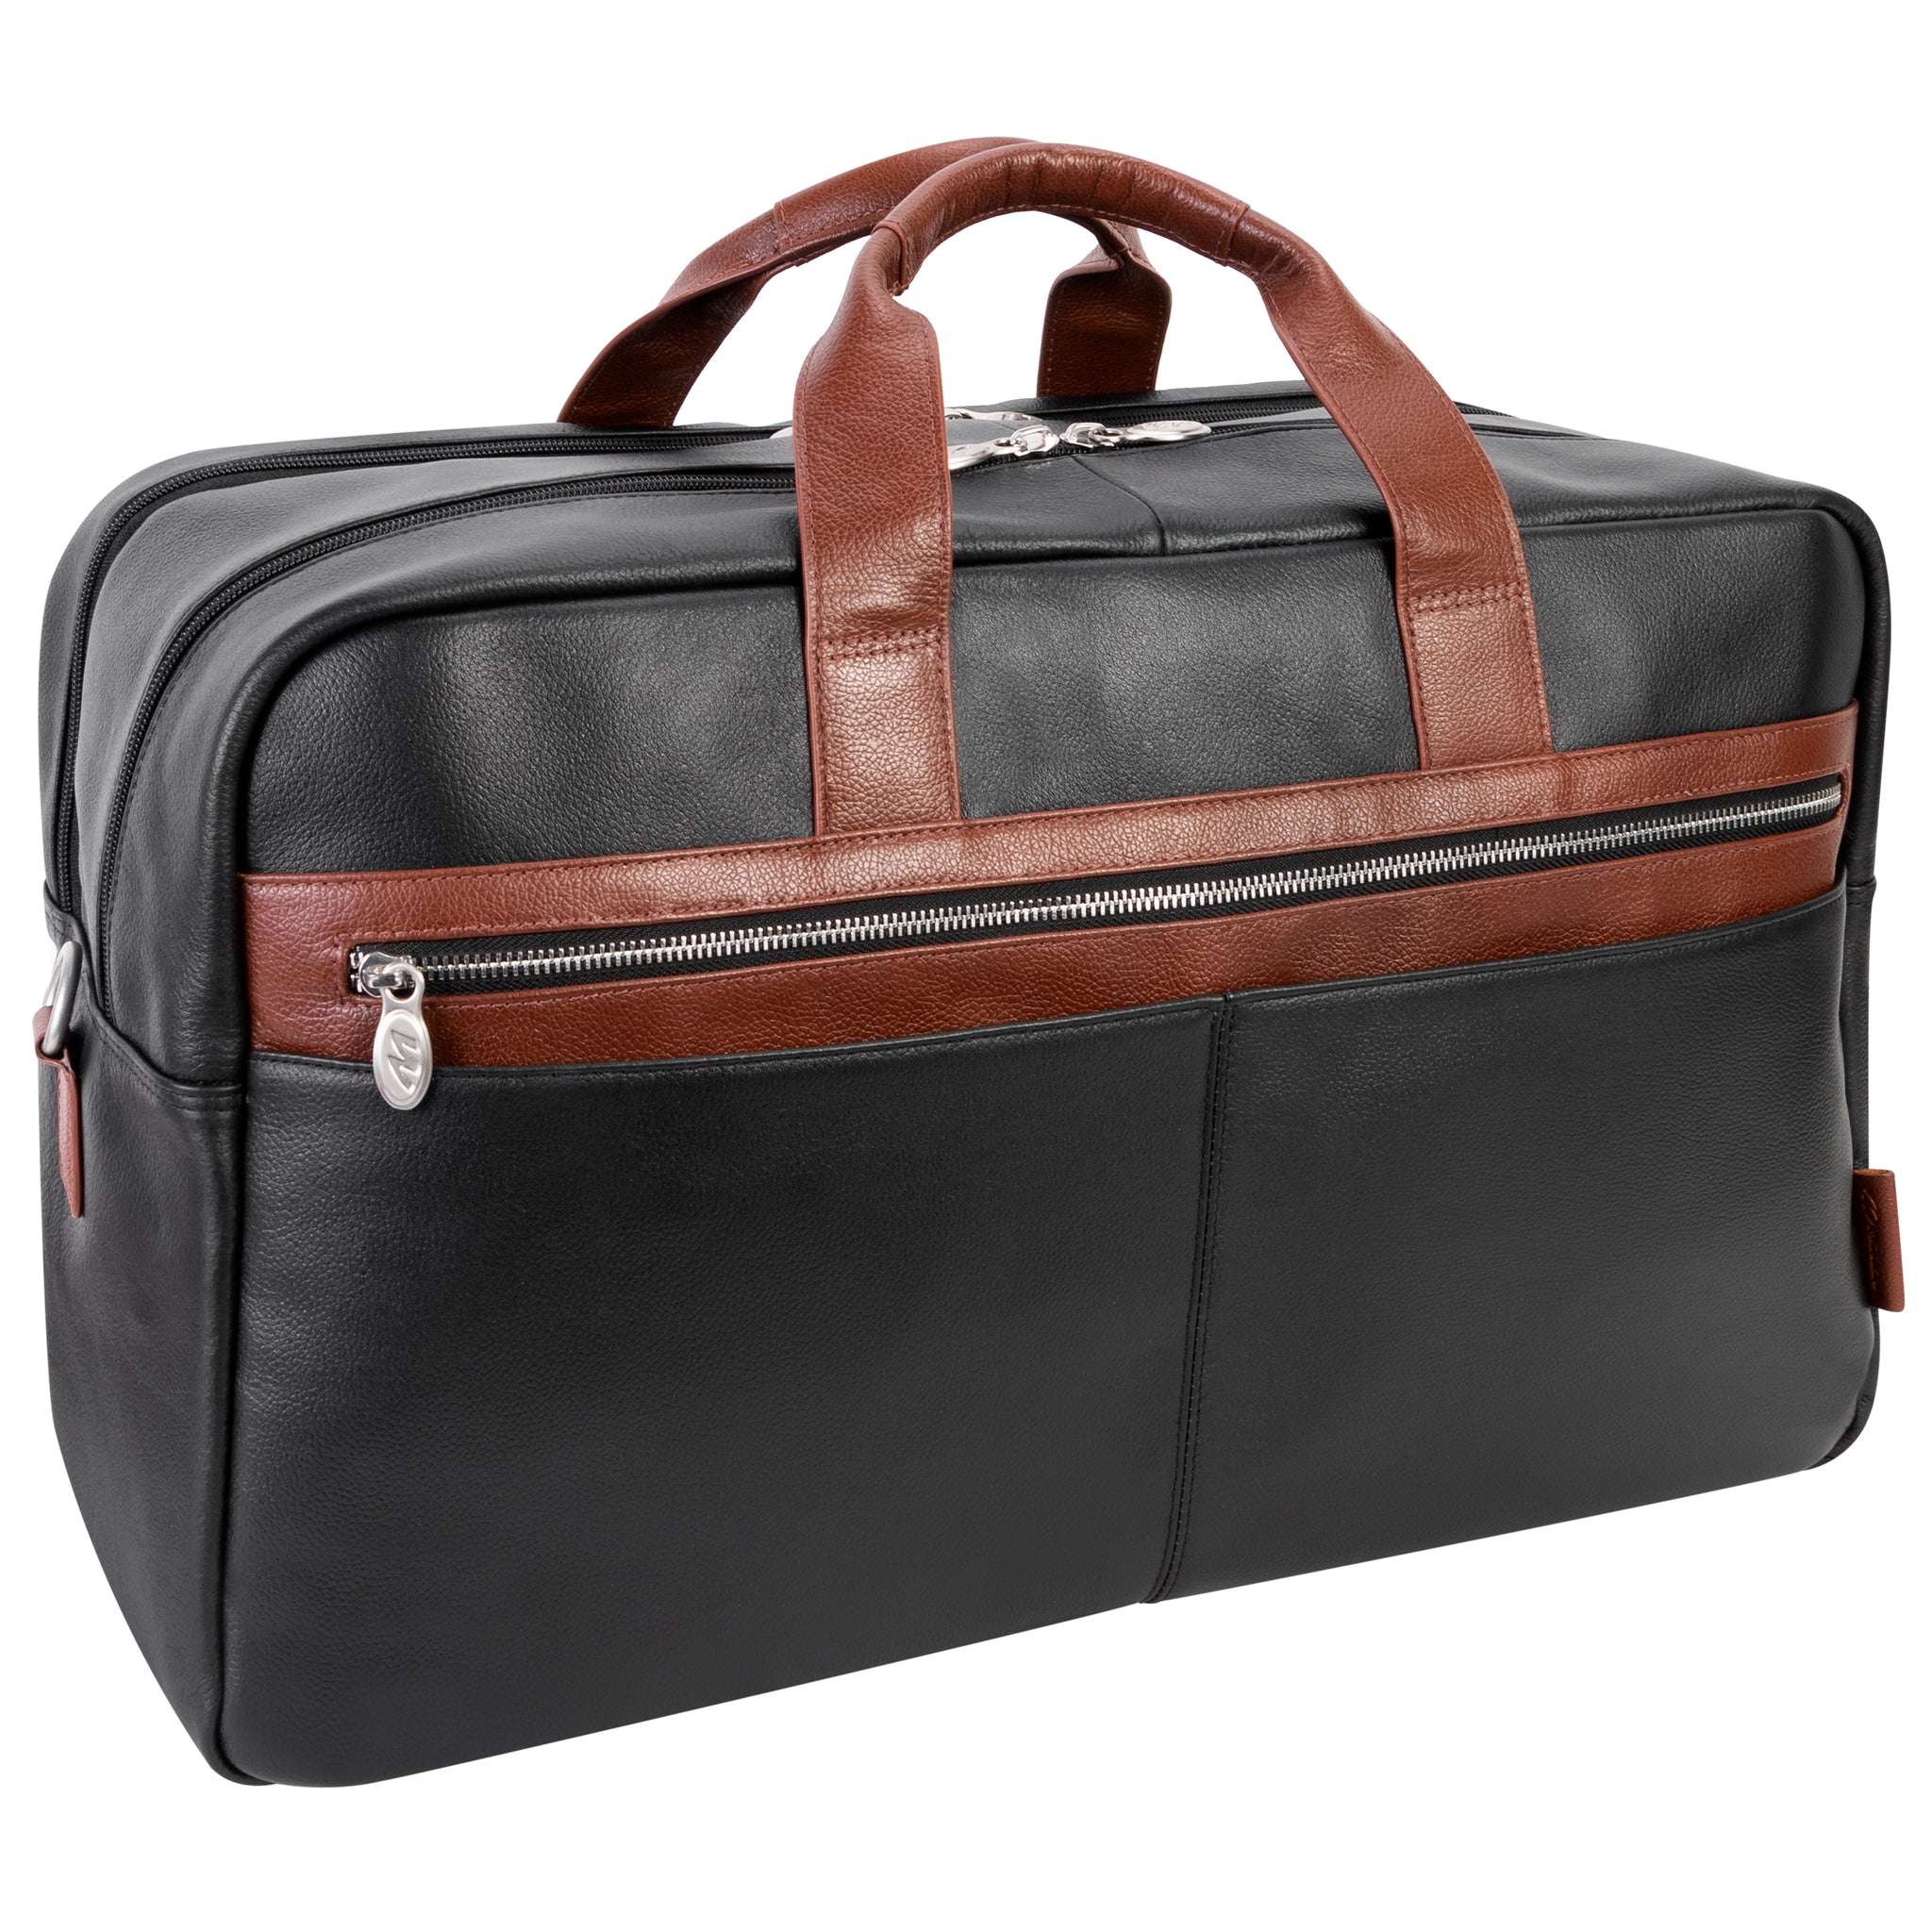 McKlein WELLINGTON 21" Leather, Two-tone, Dual-Compartment, Laptop & Tablet Carry-All Duffel